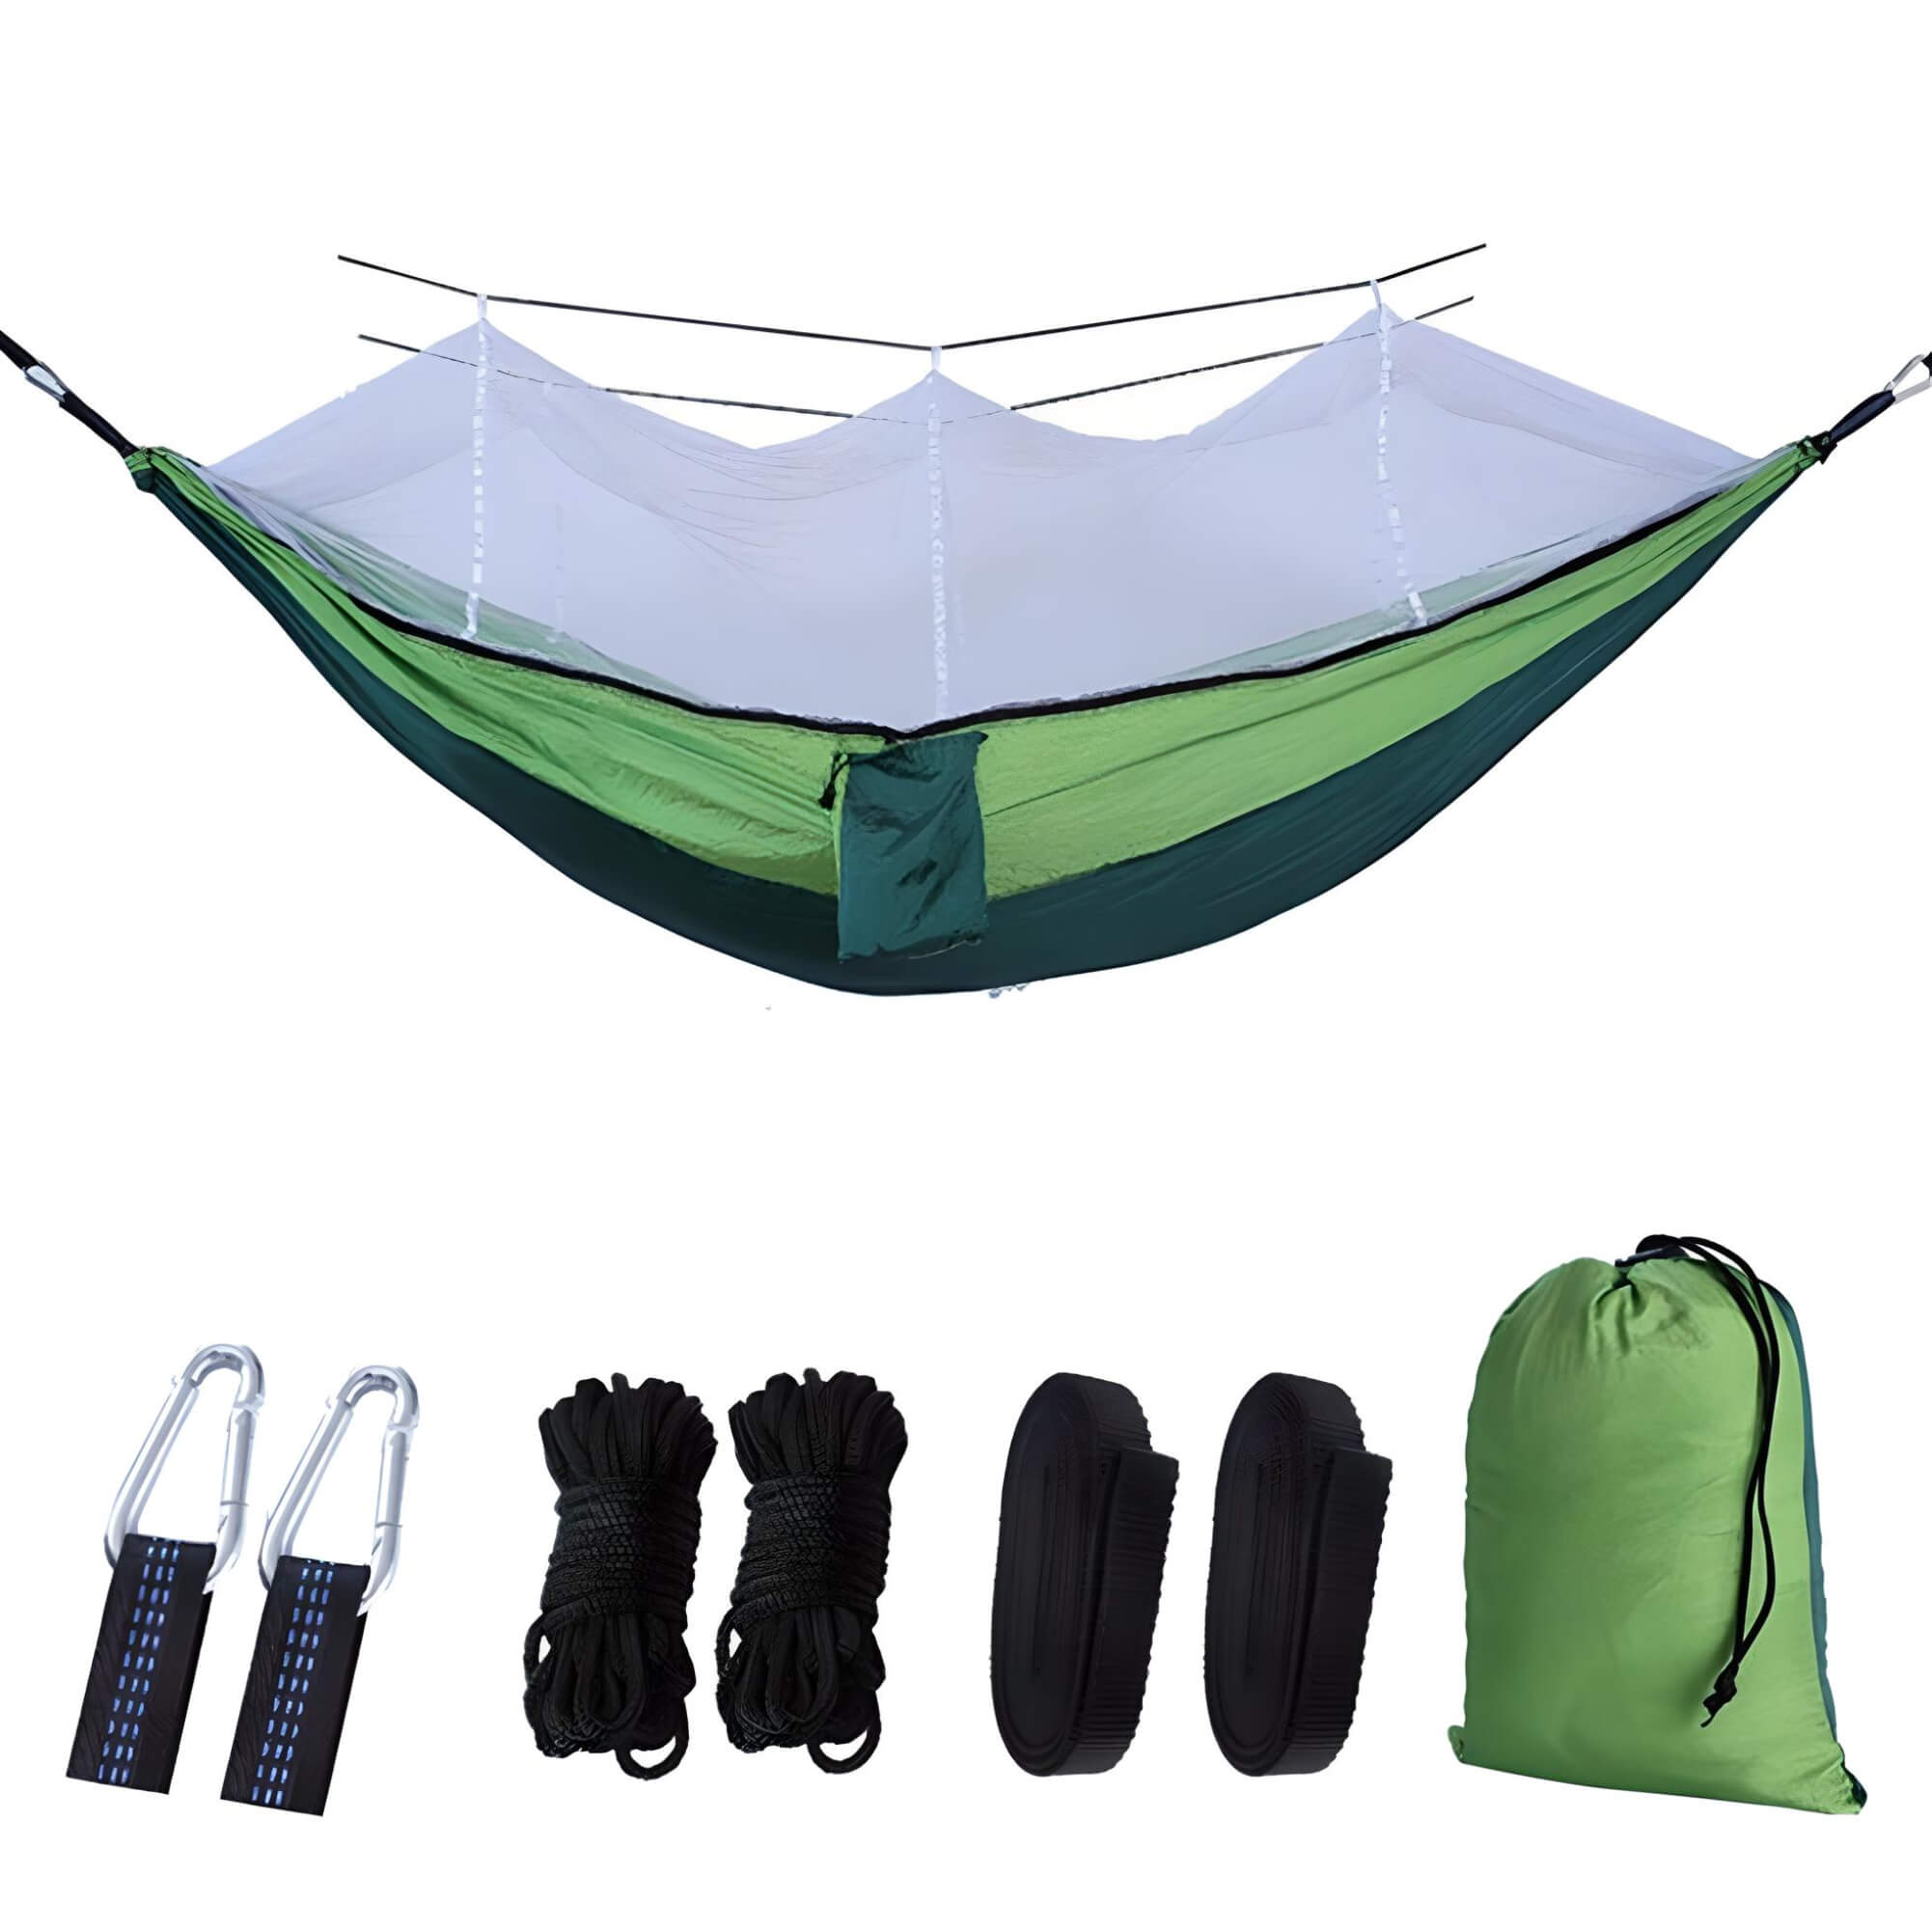 back-packing-tree-tent-green-color